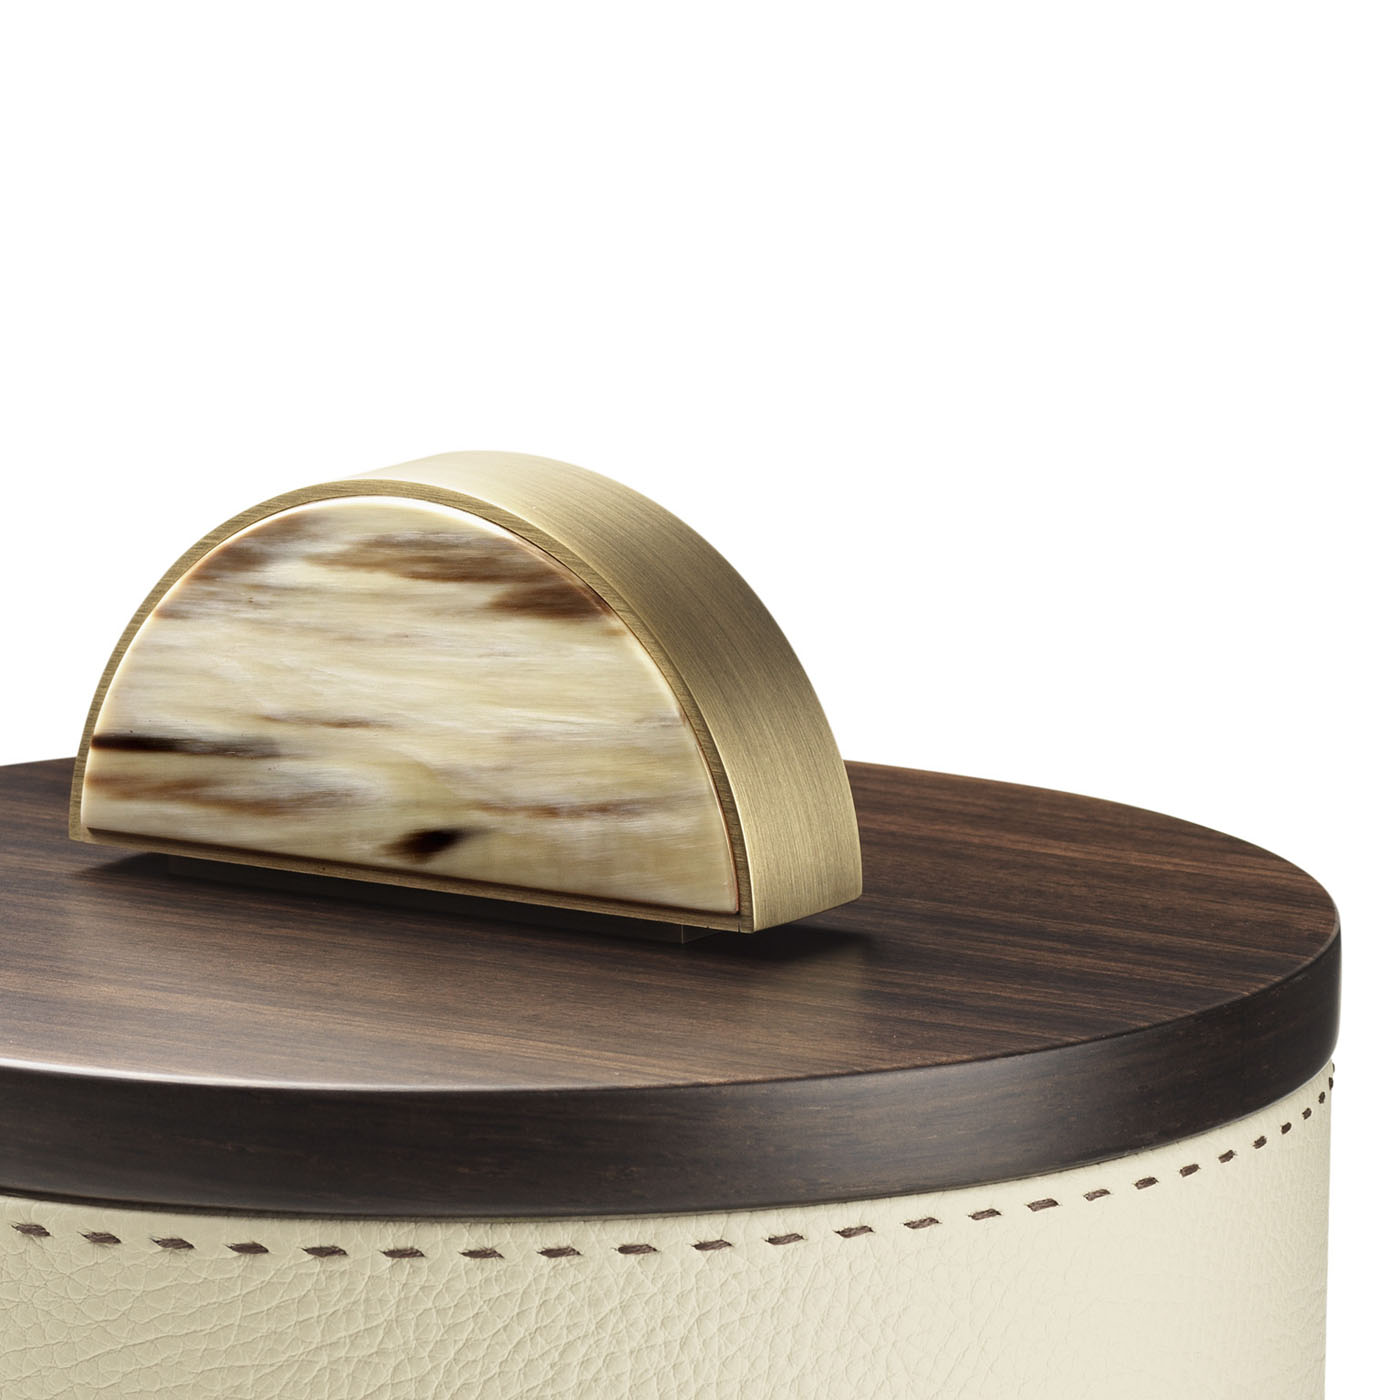 Picture frames and boxes - Agneta box in horn, leather and Amara ebony veneer - detail - Arcahorn